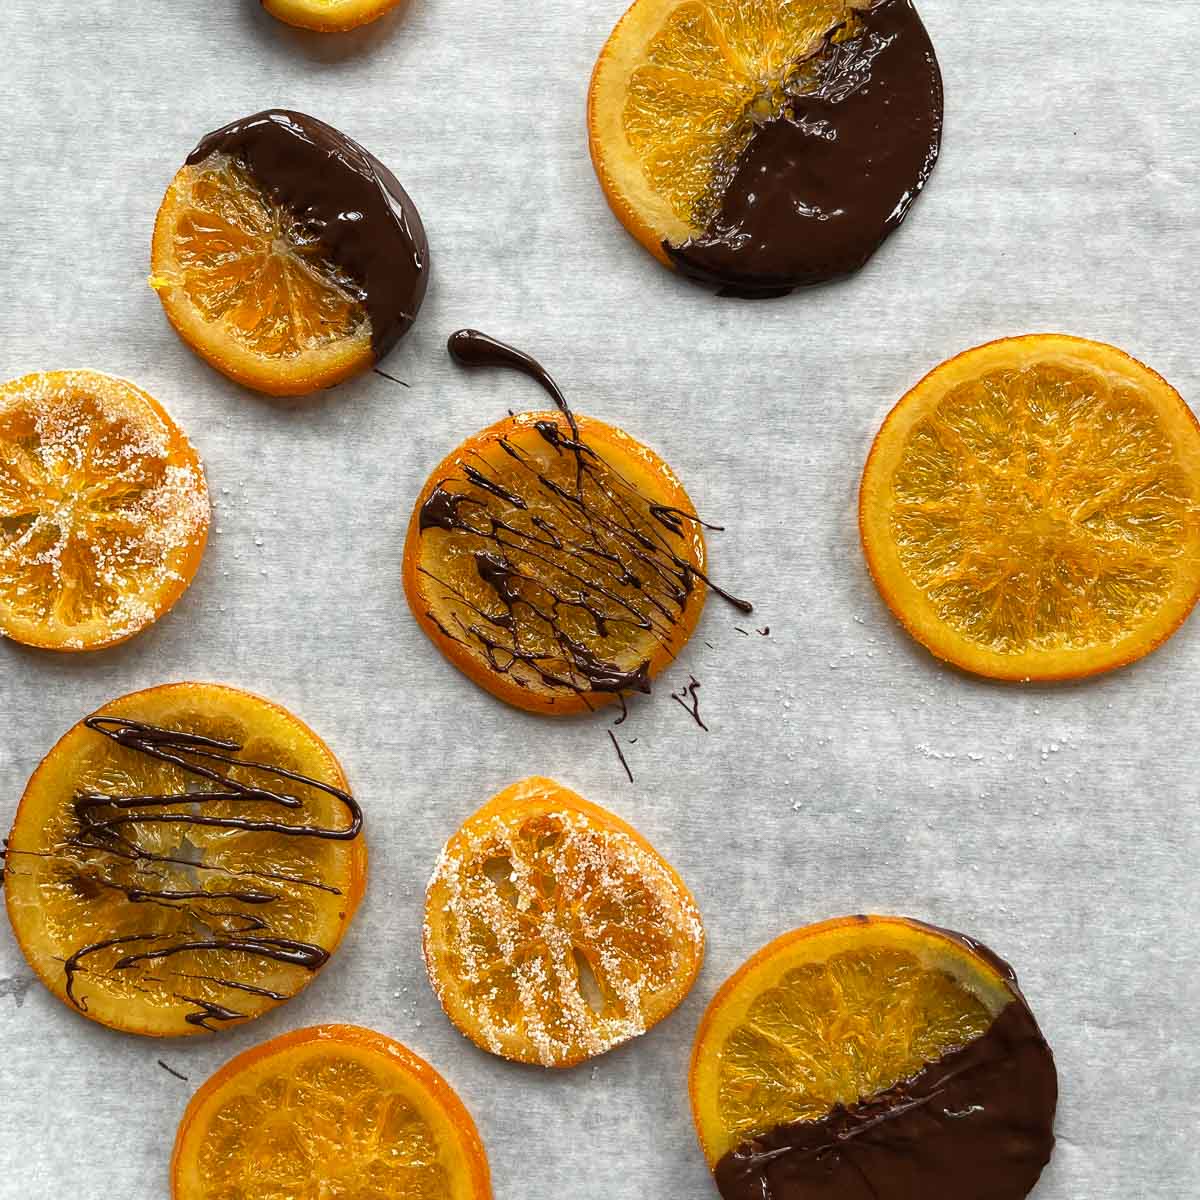 candied orange slices dipped in chocolate on parchment paper